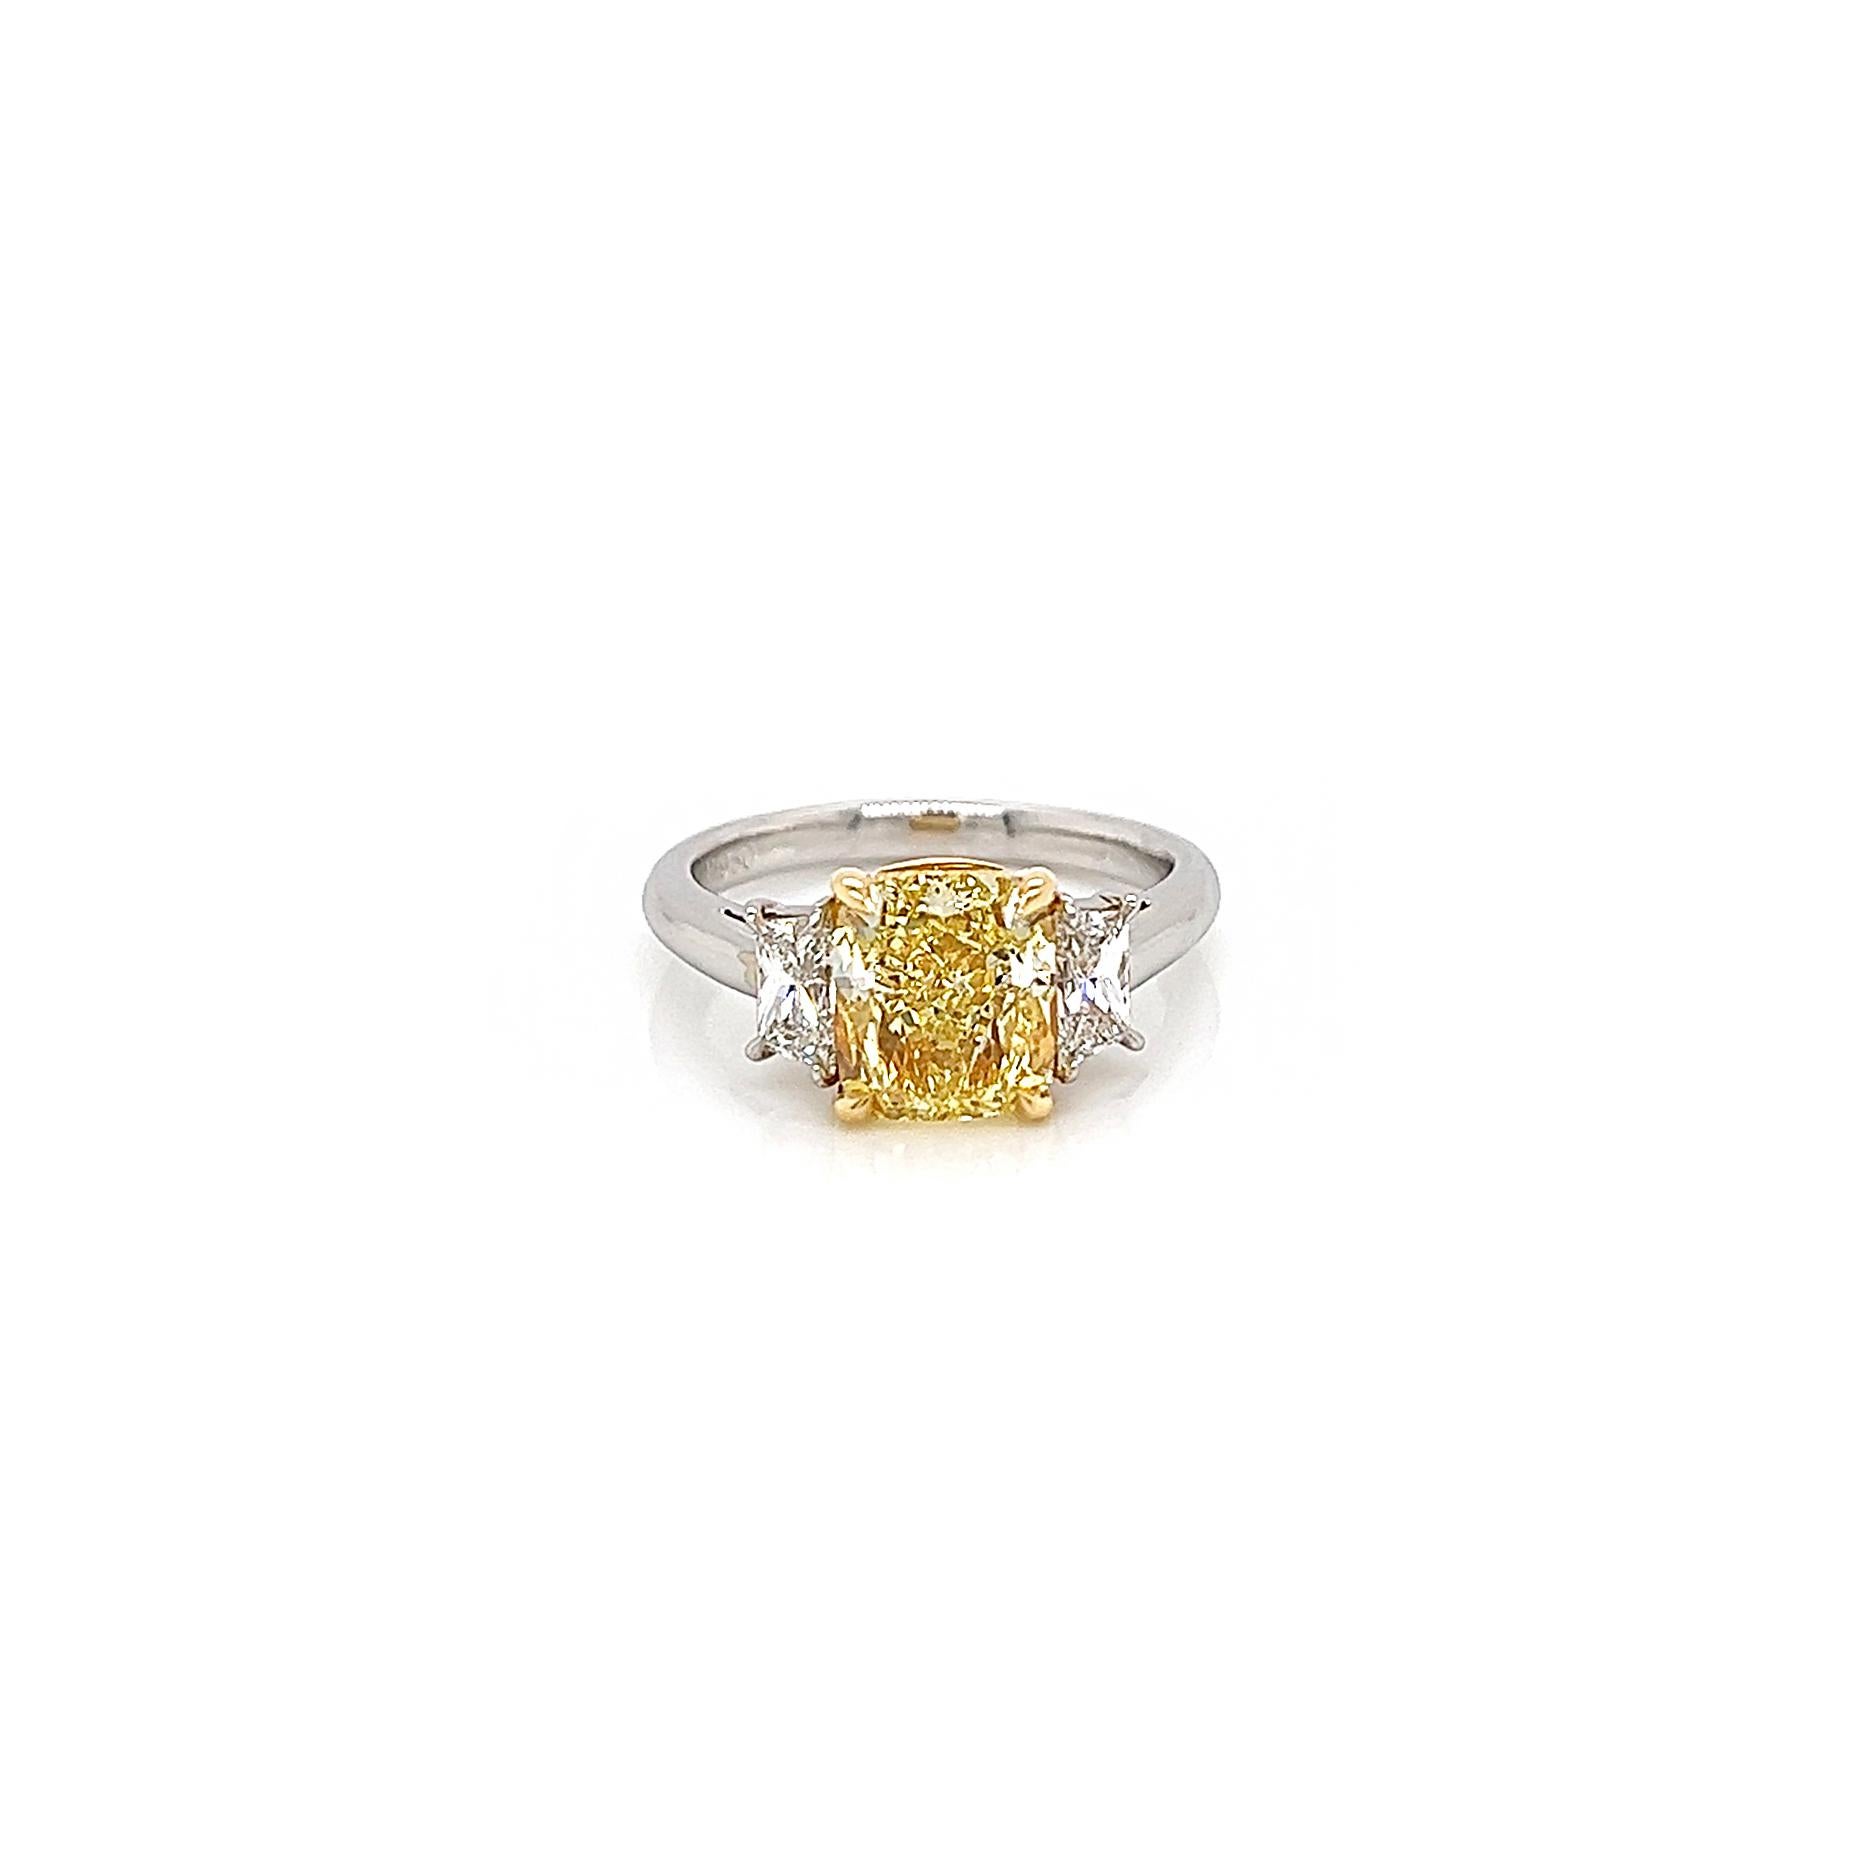 3.61 Total Carat Fancy Yellow Diamond Three-Stone Ladies Engagement Ring. GIA Certified.

Platinum three stone fancy diamond engagement ring crafted with an amazing fancy yellow center diamond. So rare and so beautiful you can often see celebrities